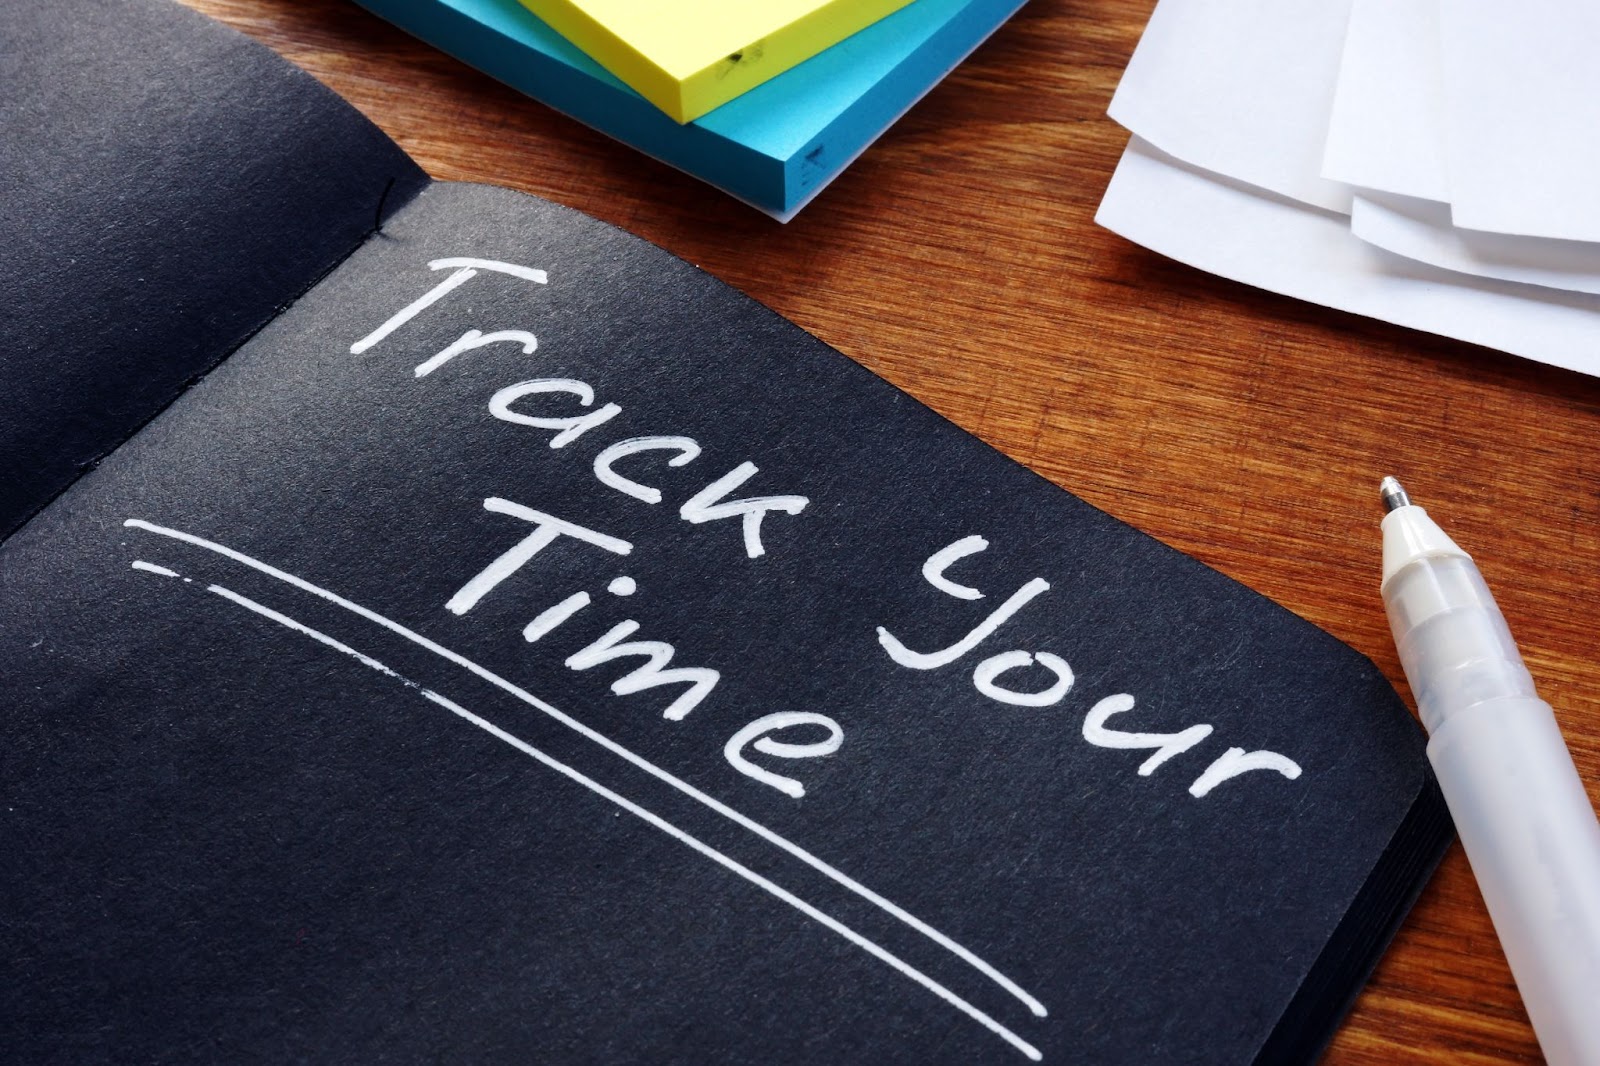 Track Your Time written in a notebook